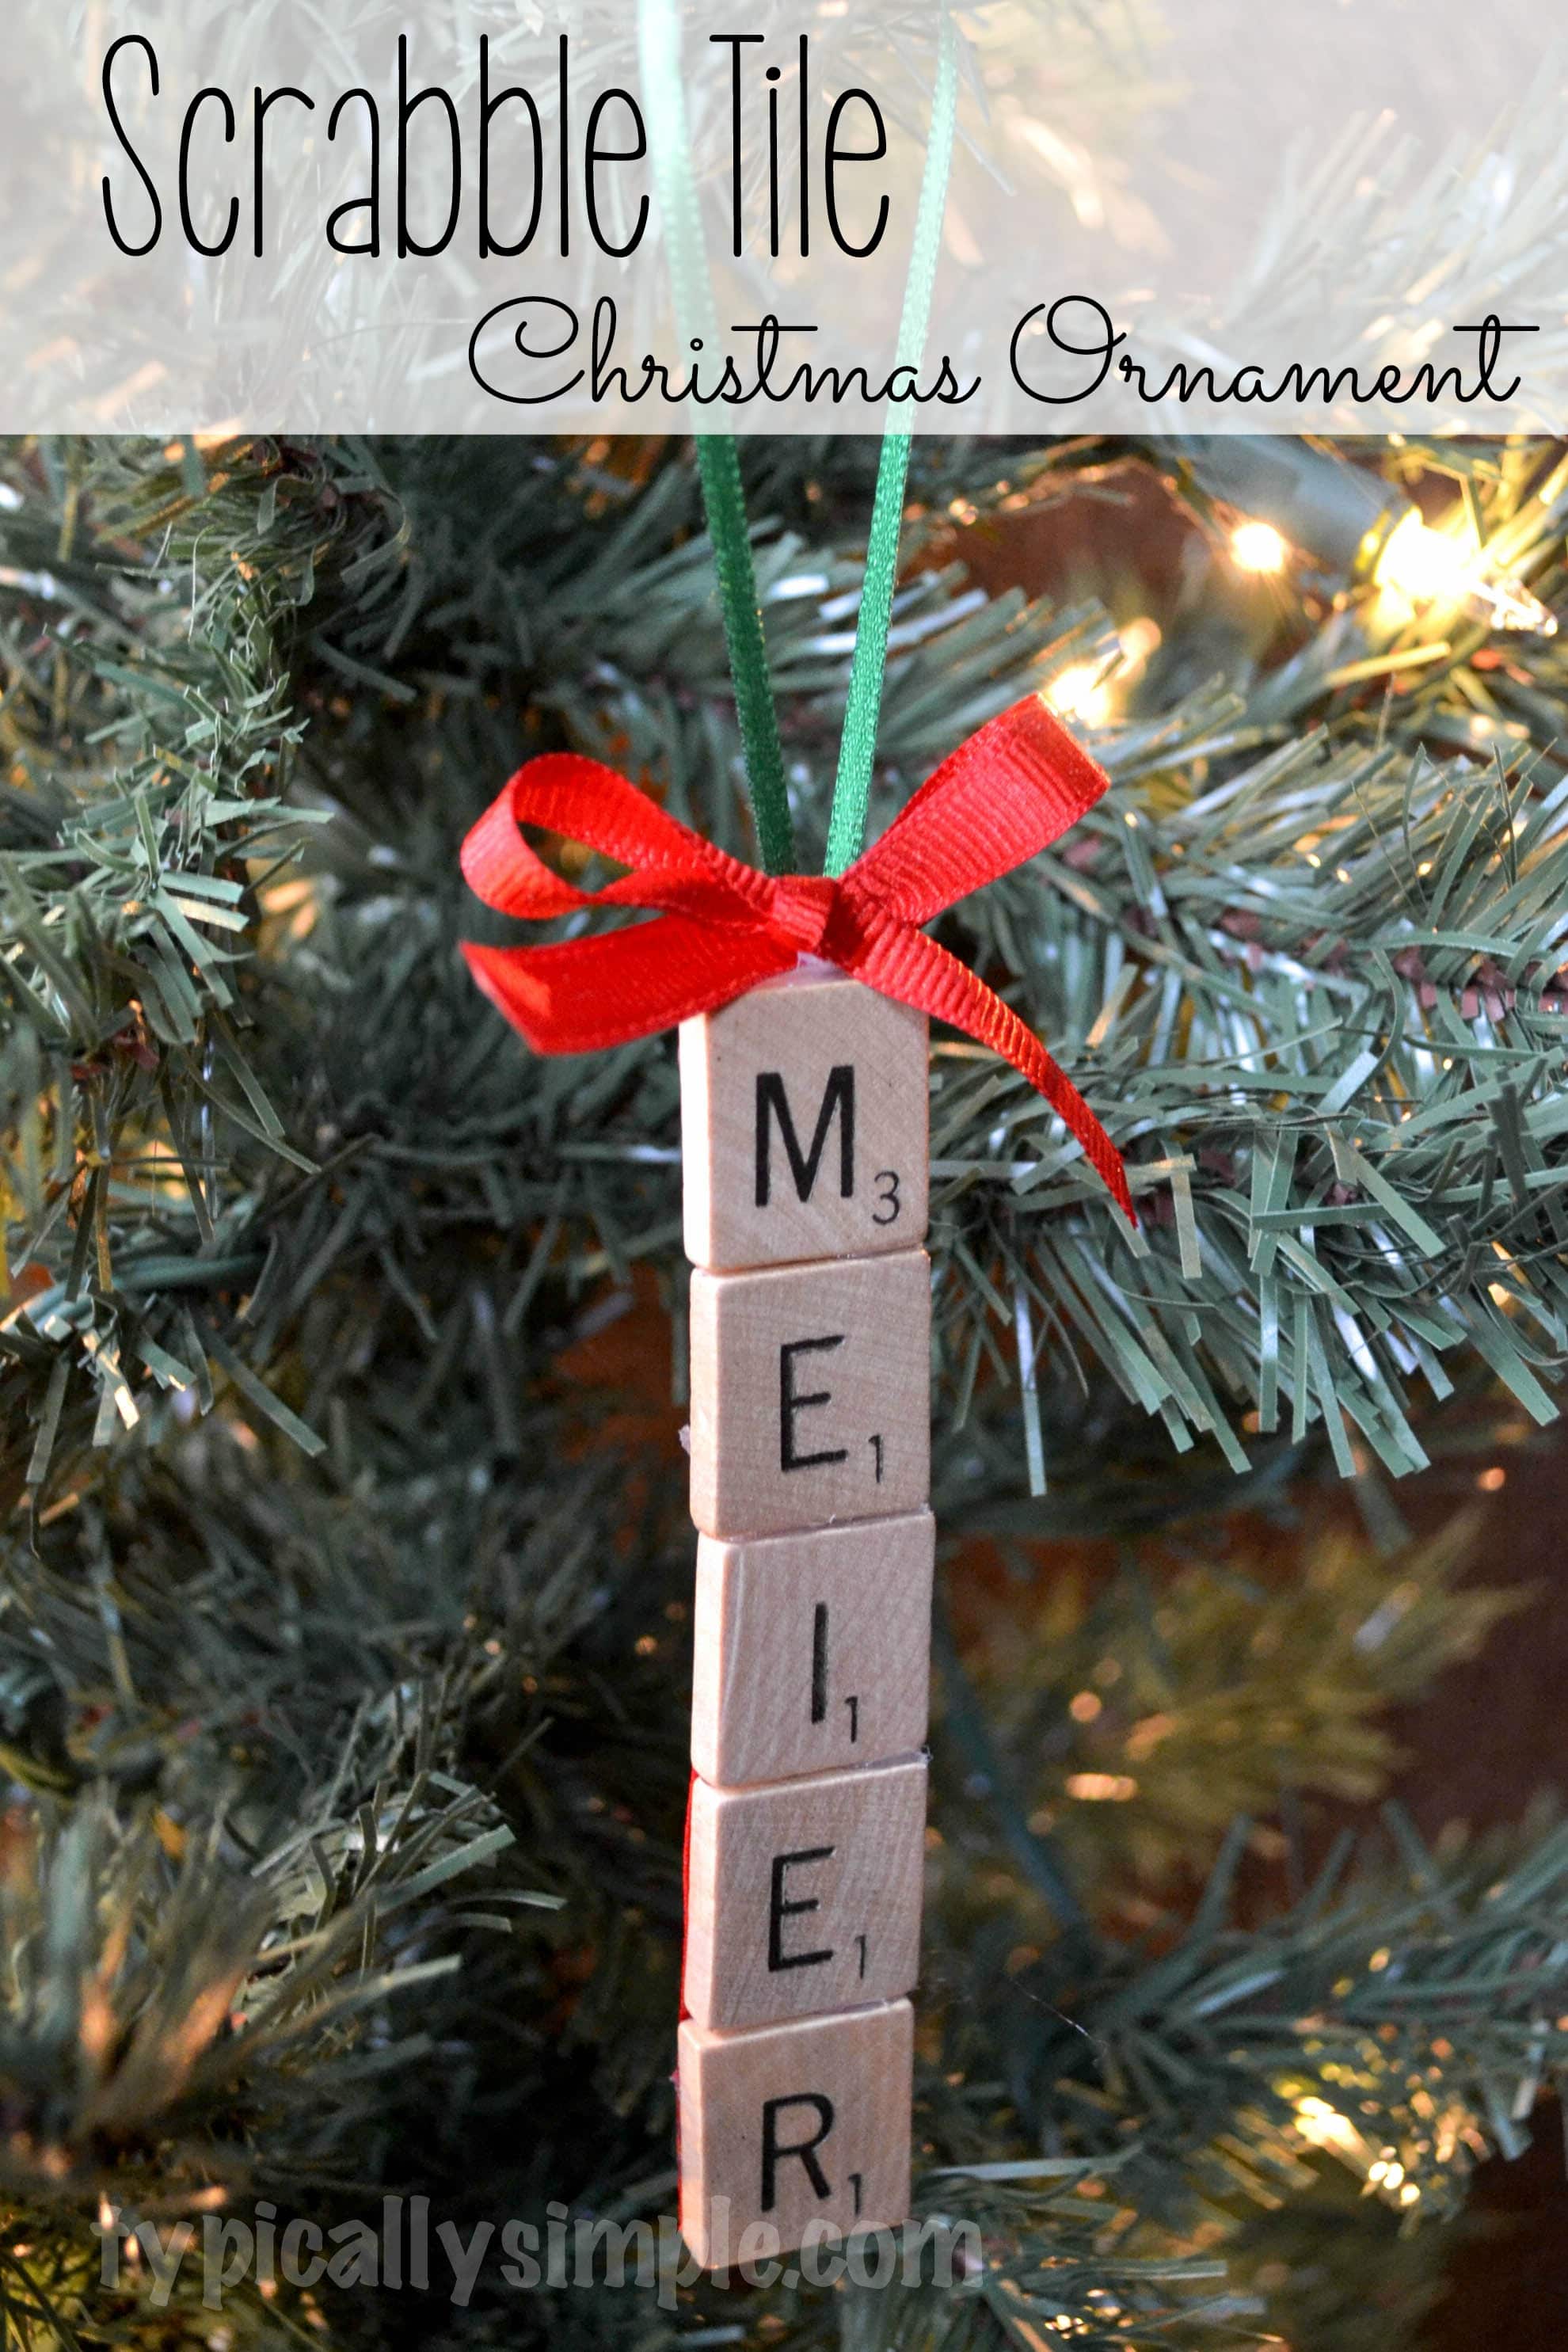 Scrabble Tile Christmas Ornament - Typically Simple